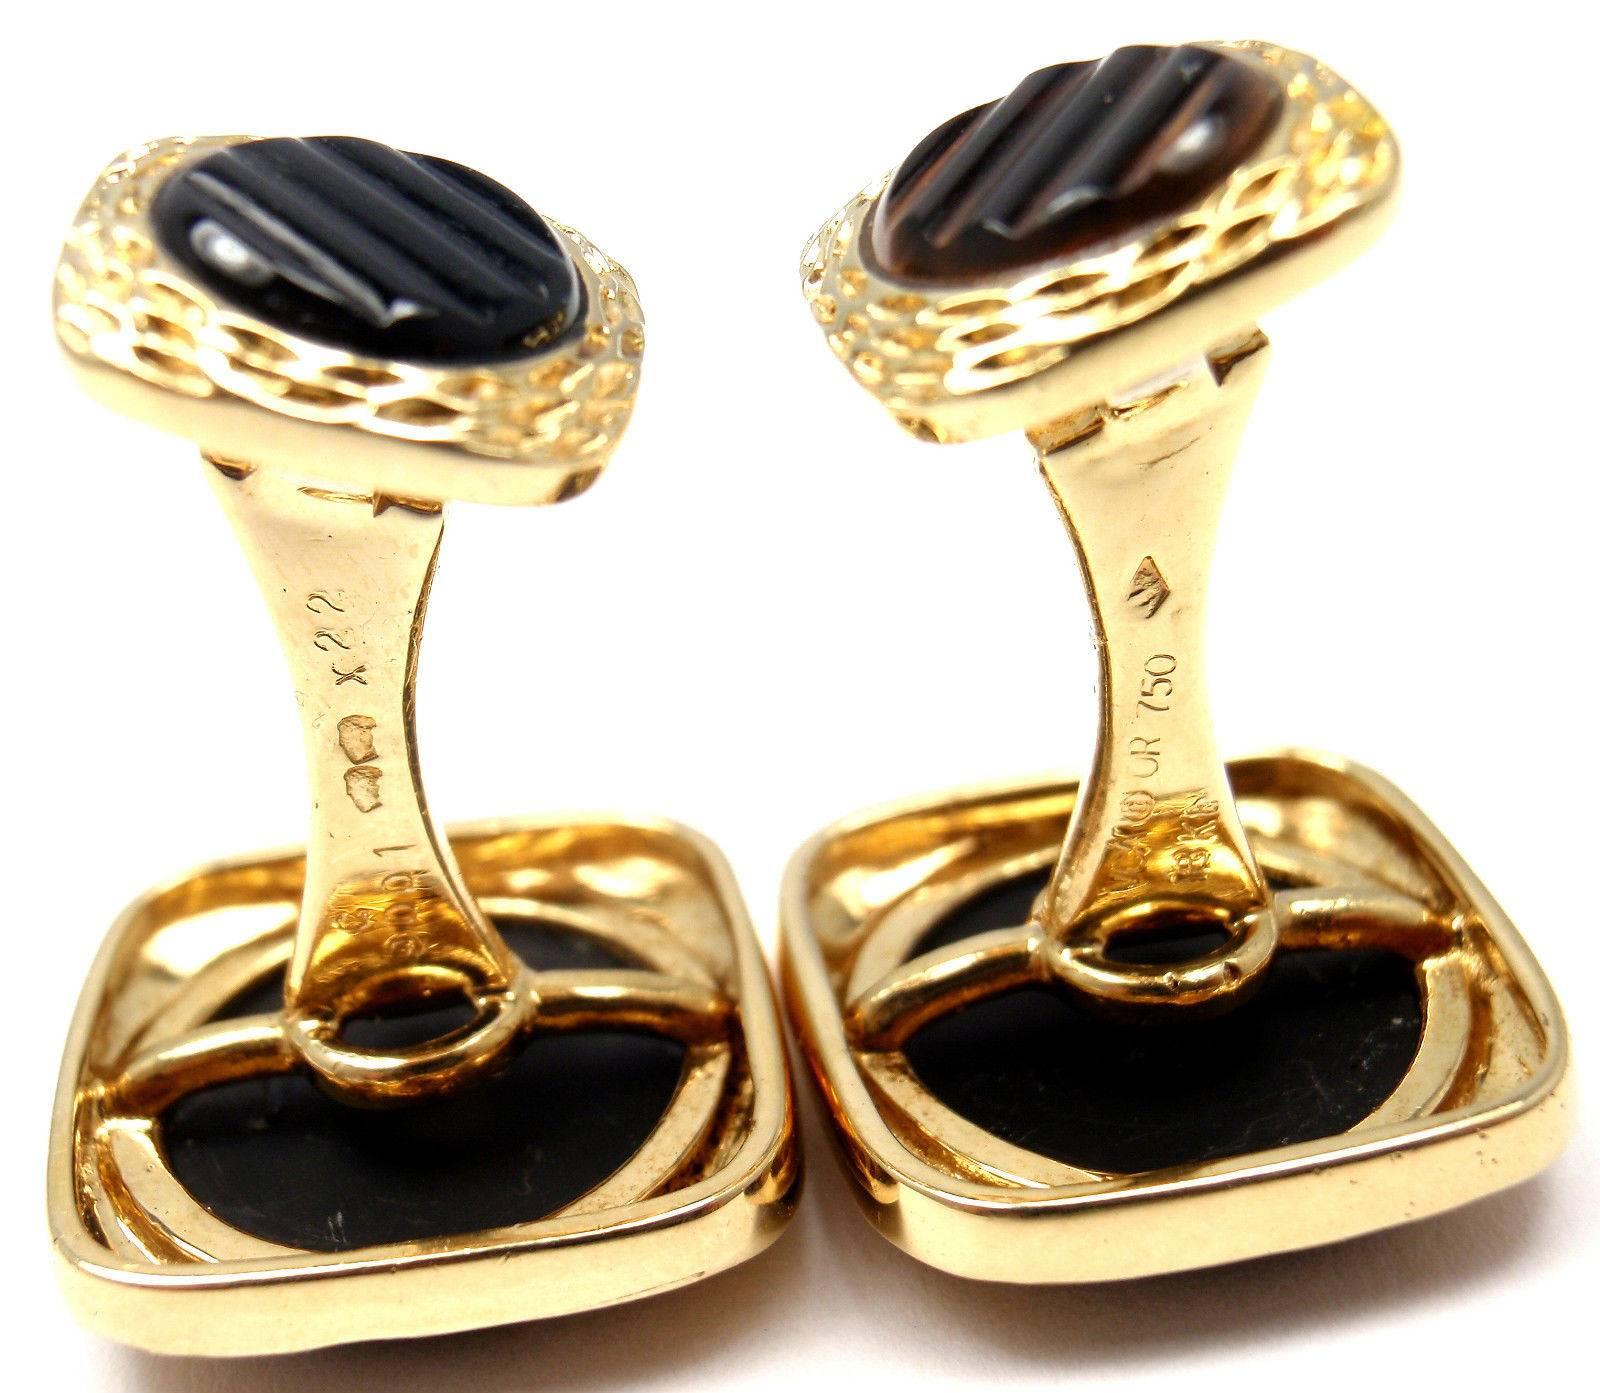 Van Cleef & Arpels Agate Gold Cufflinks In Excellent Condition For Sale In Holland, PA